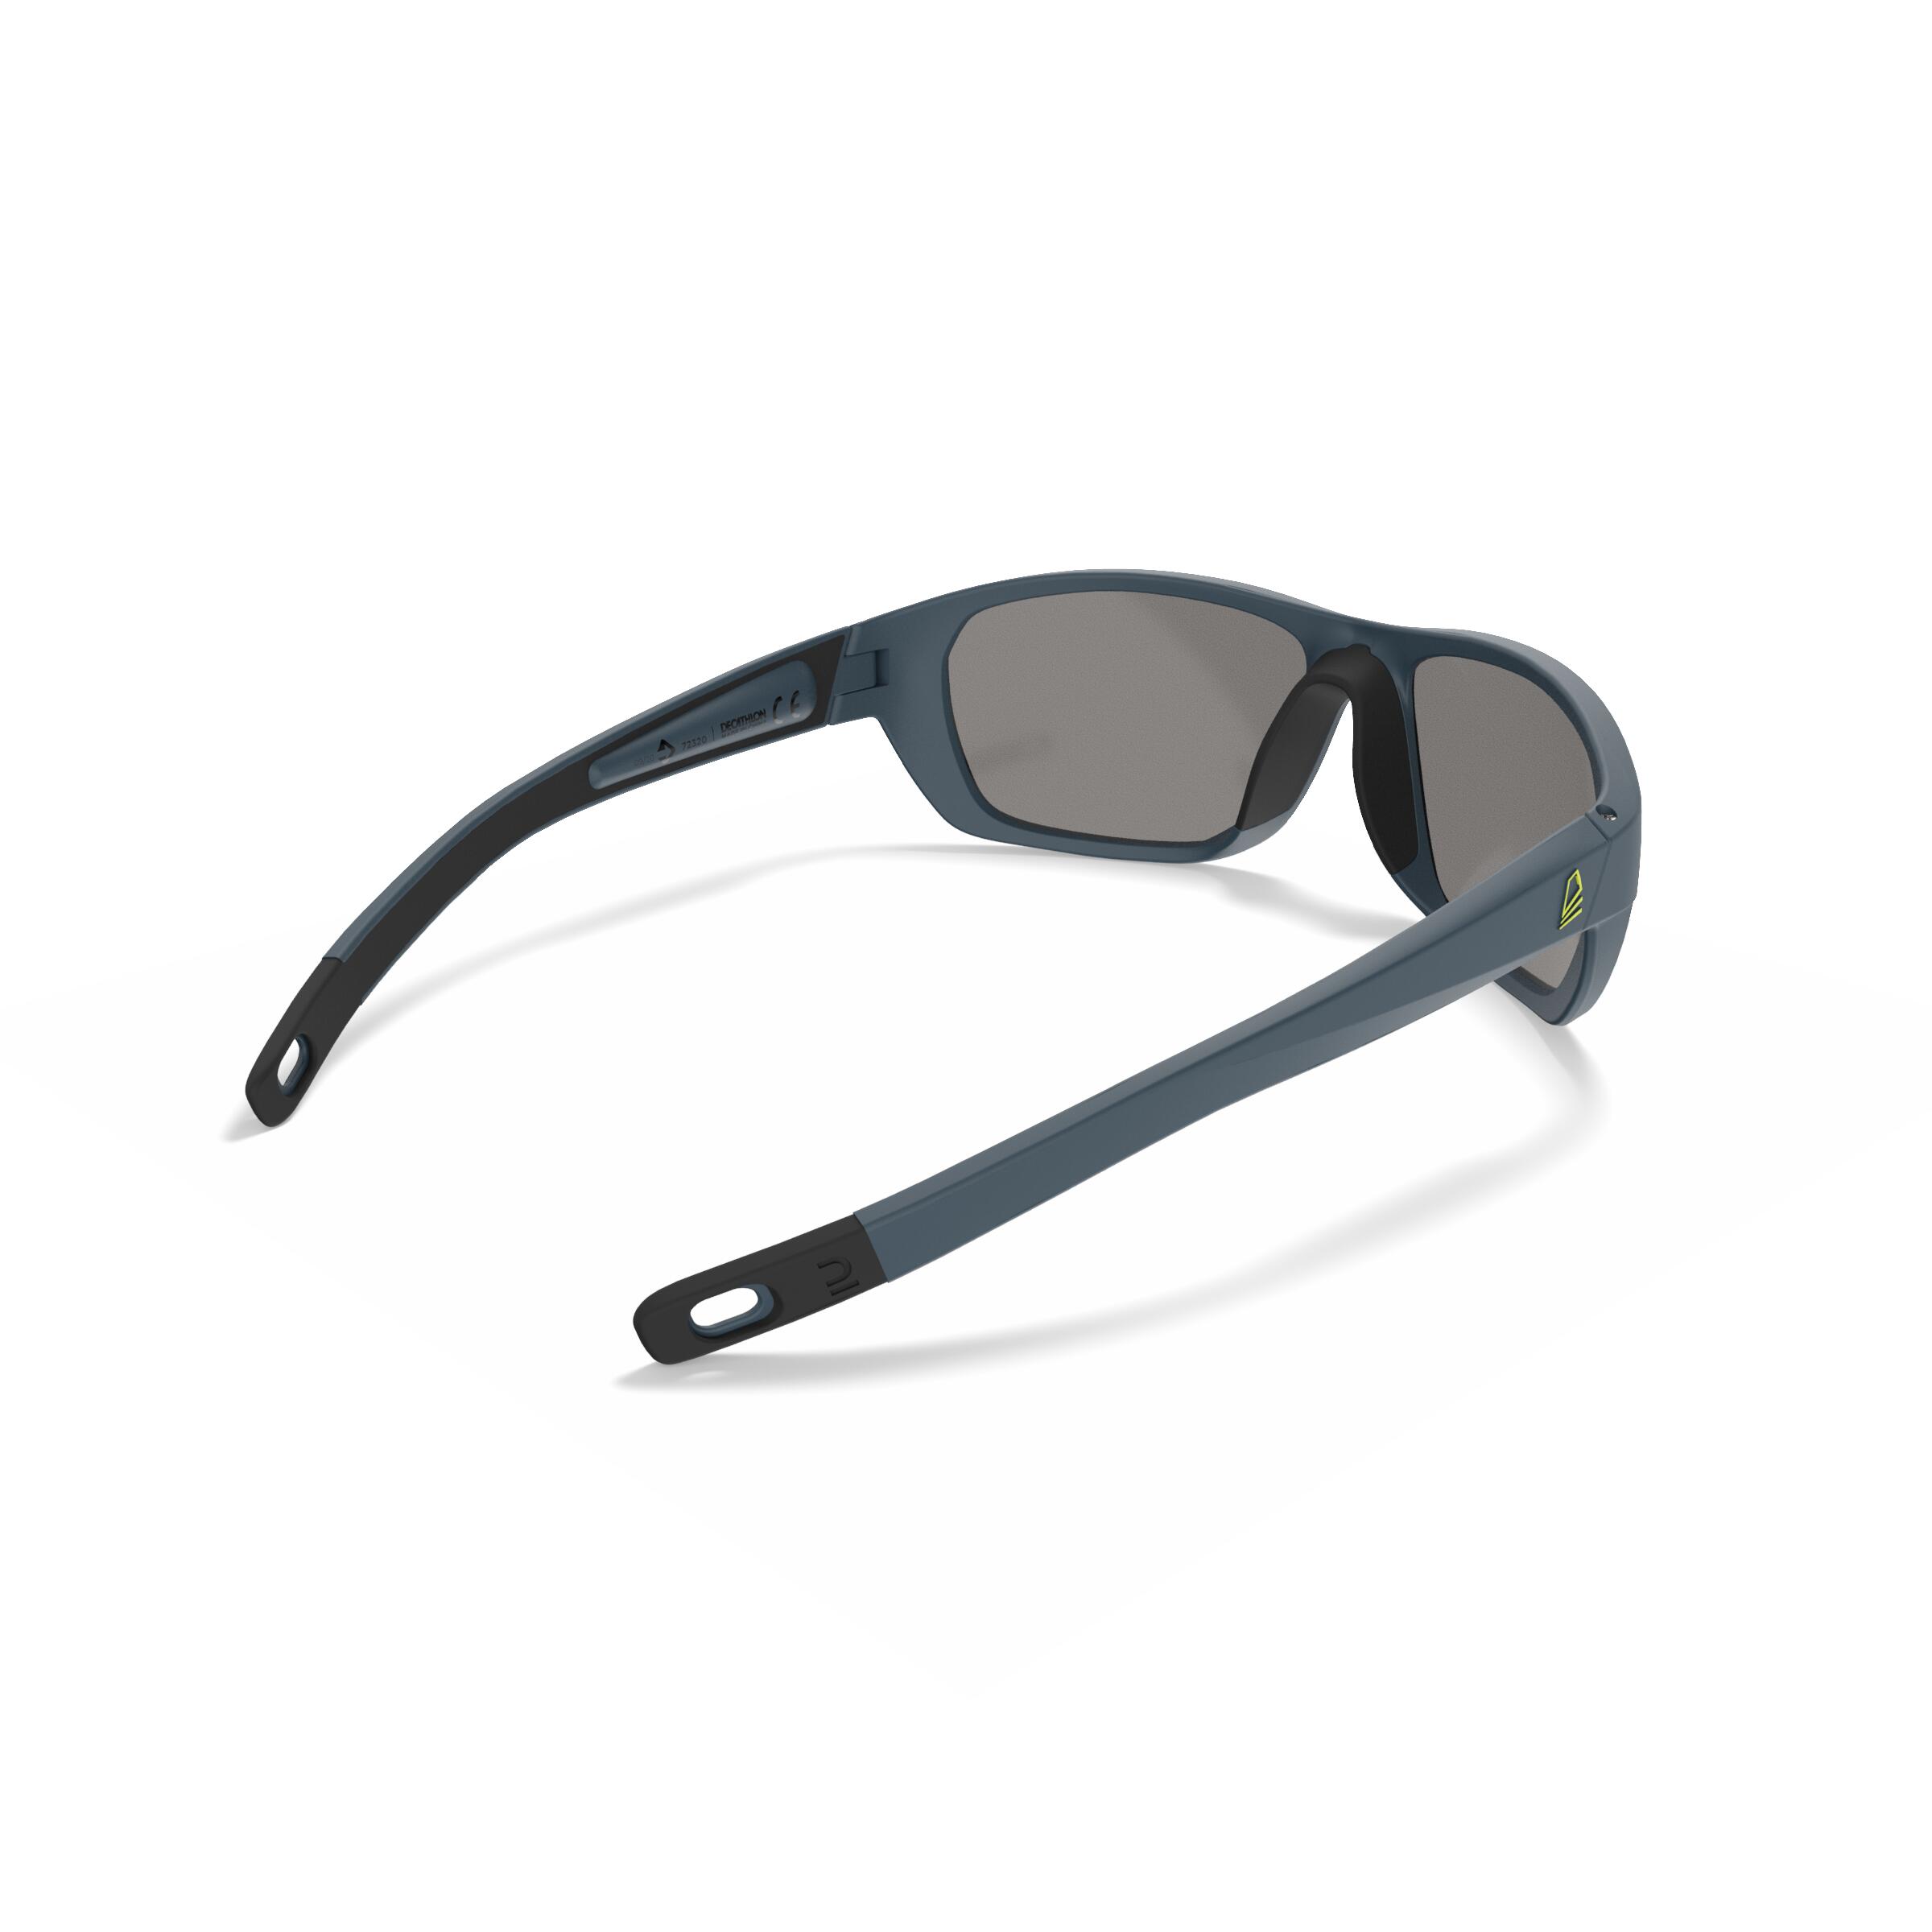 Quechua By Decathlon Unisex Sports UV Protected Sunglasses MH500 Cat 3  Price in India, Full Specifications & Offers | DTashion.com